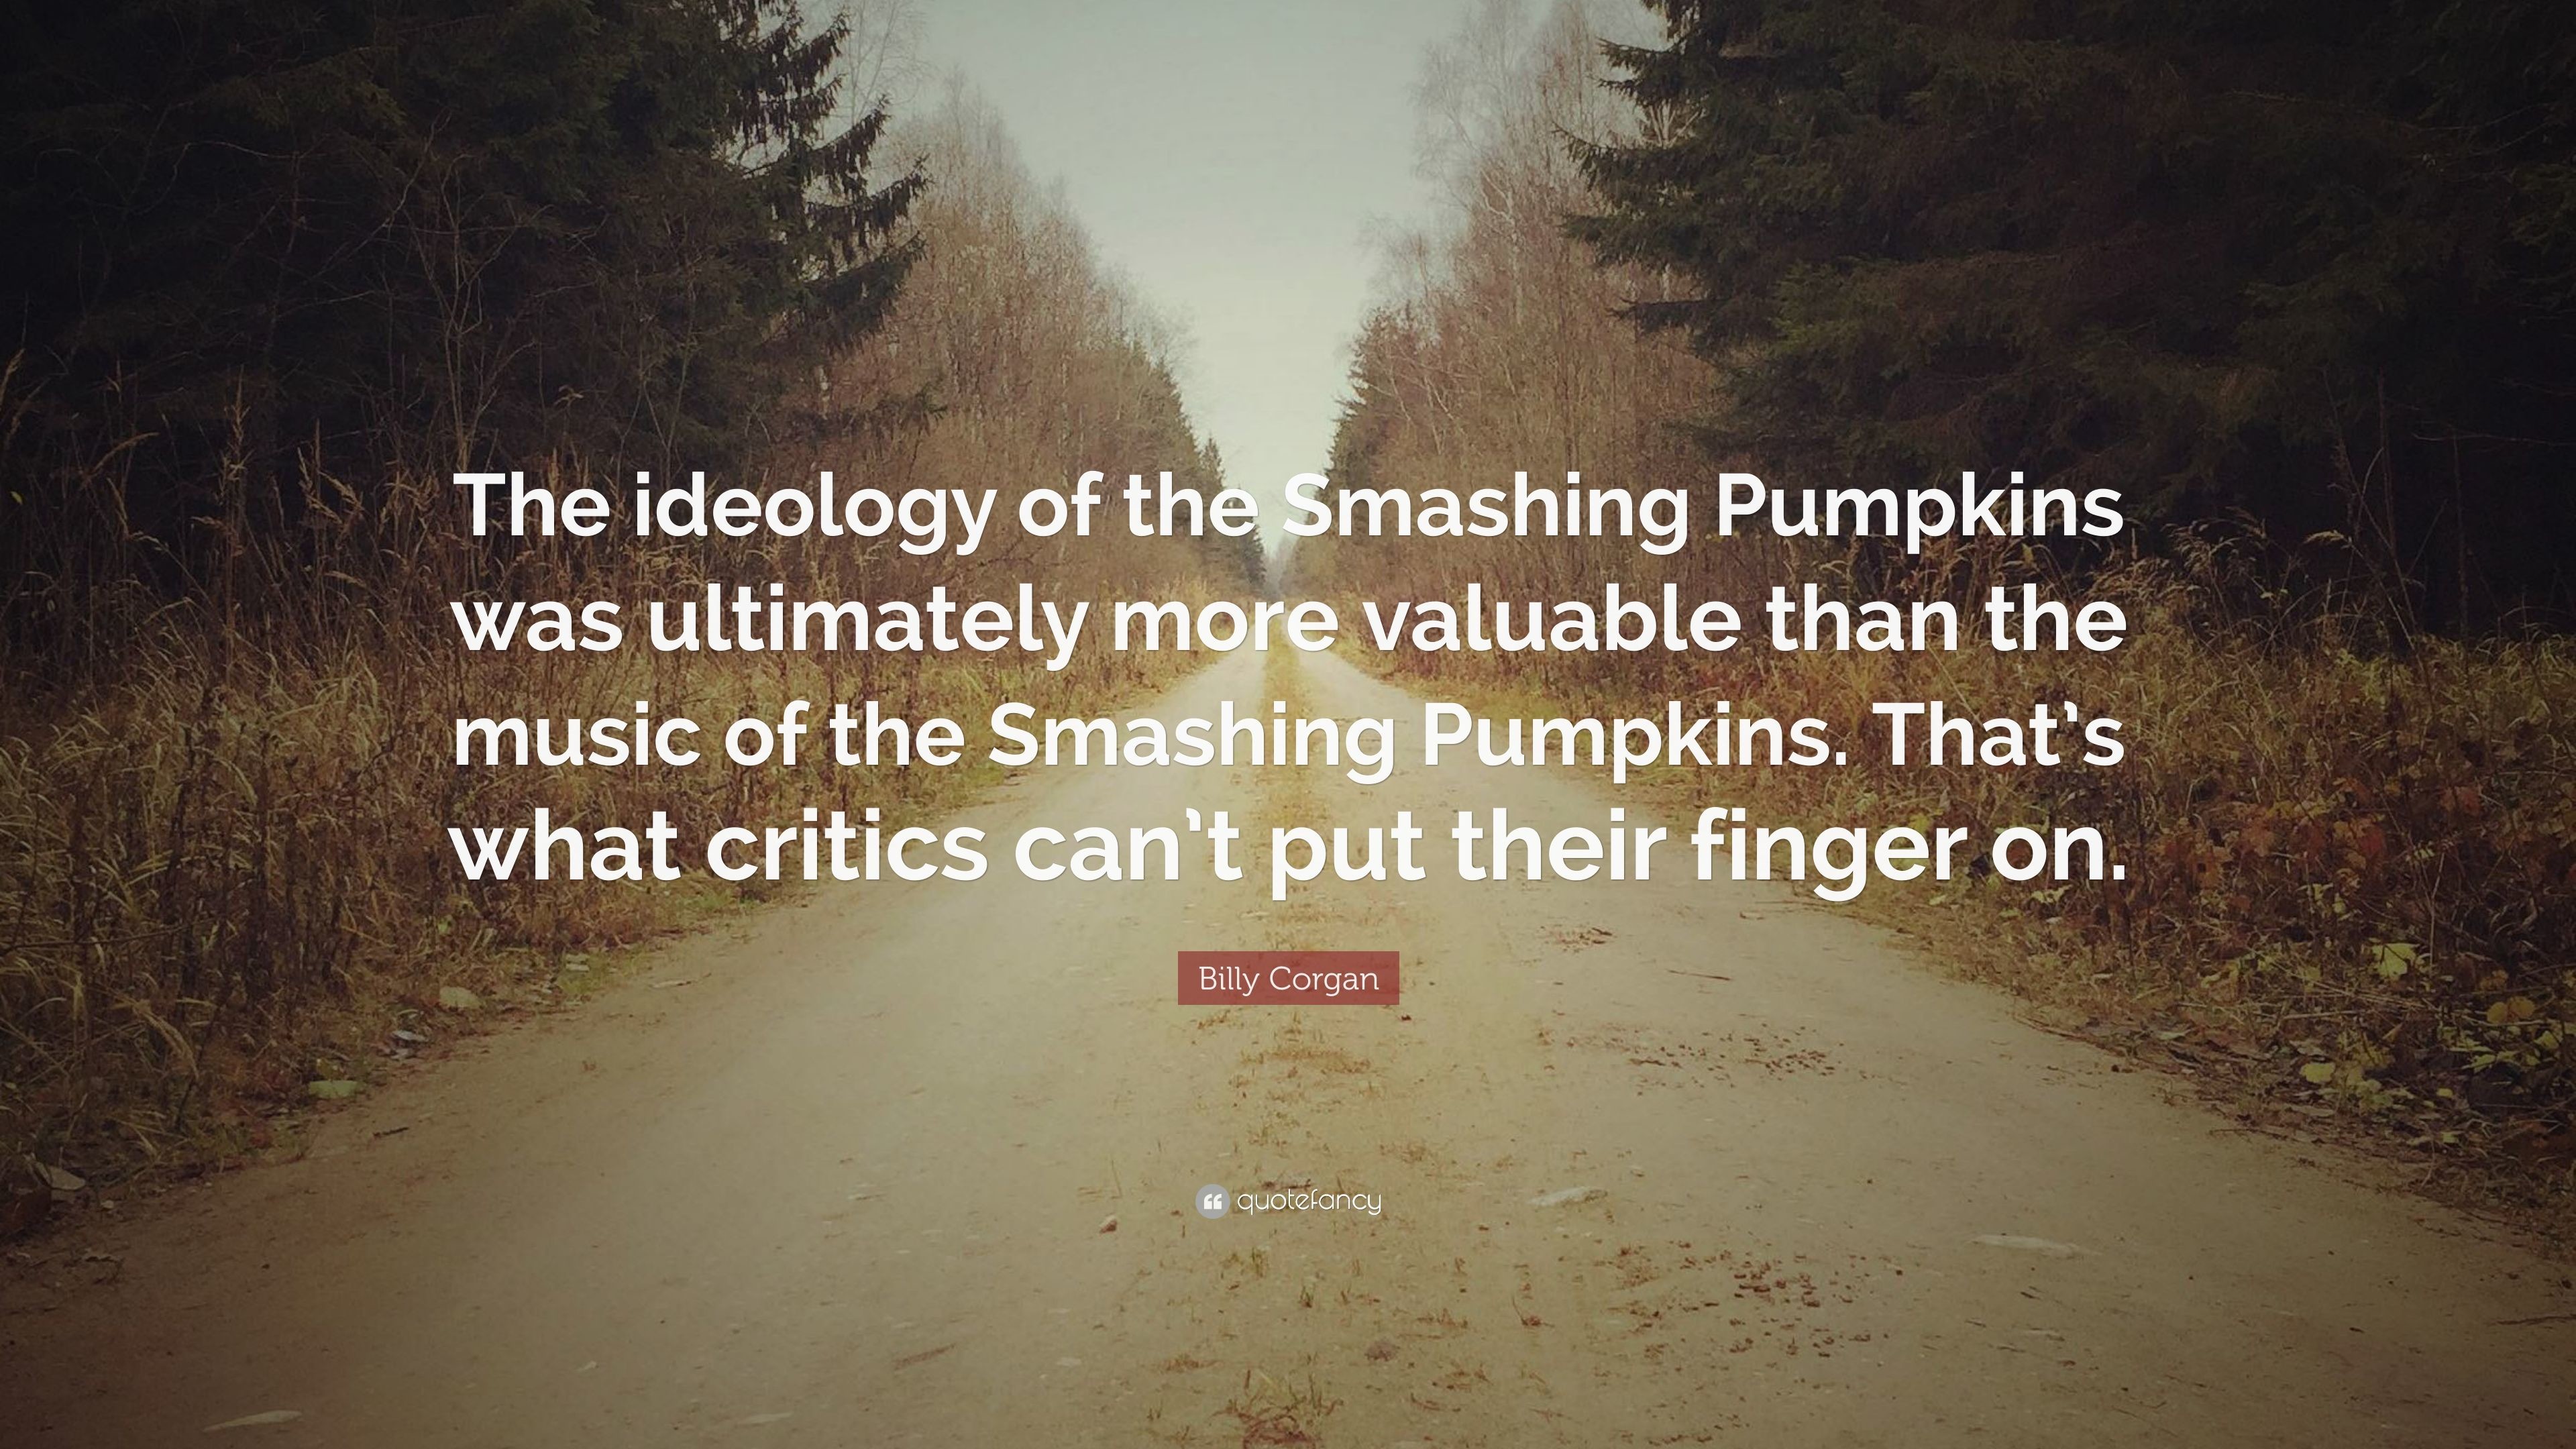 3840x2160 Billy Corgan Quote: “The ideology of the Smashing Pumpkins was ultimately  more valuable than